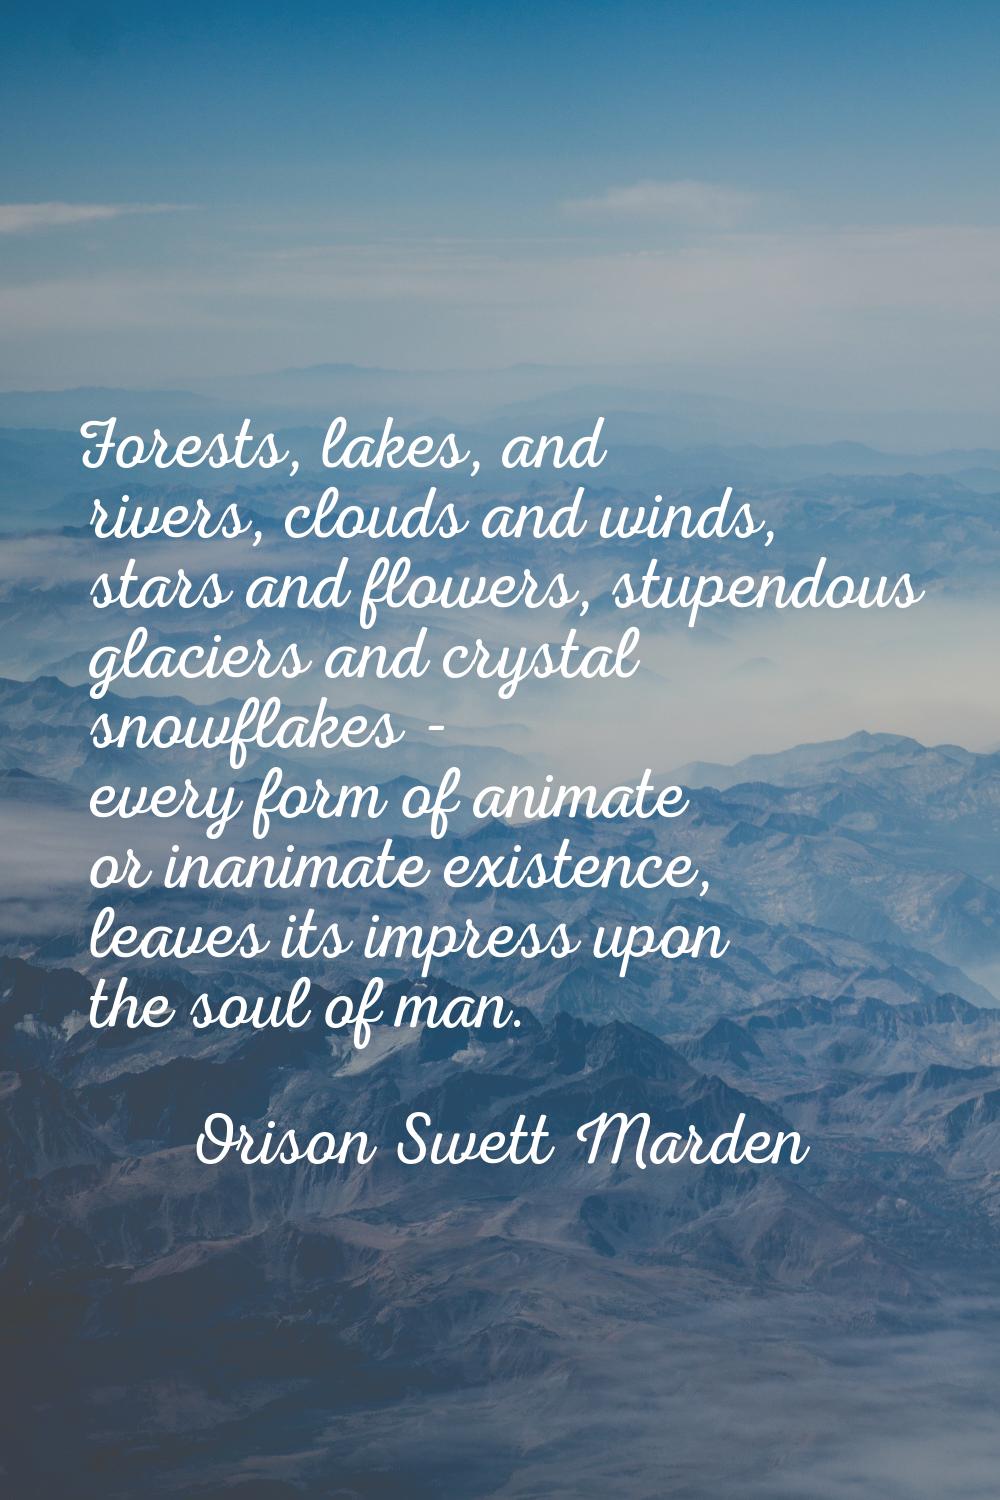 Forests, lakes, and rivers, clouds and winds, stars and flowers, stupendous glaciers and crystal sn